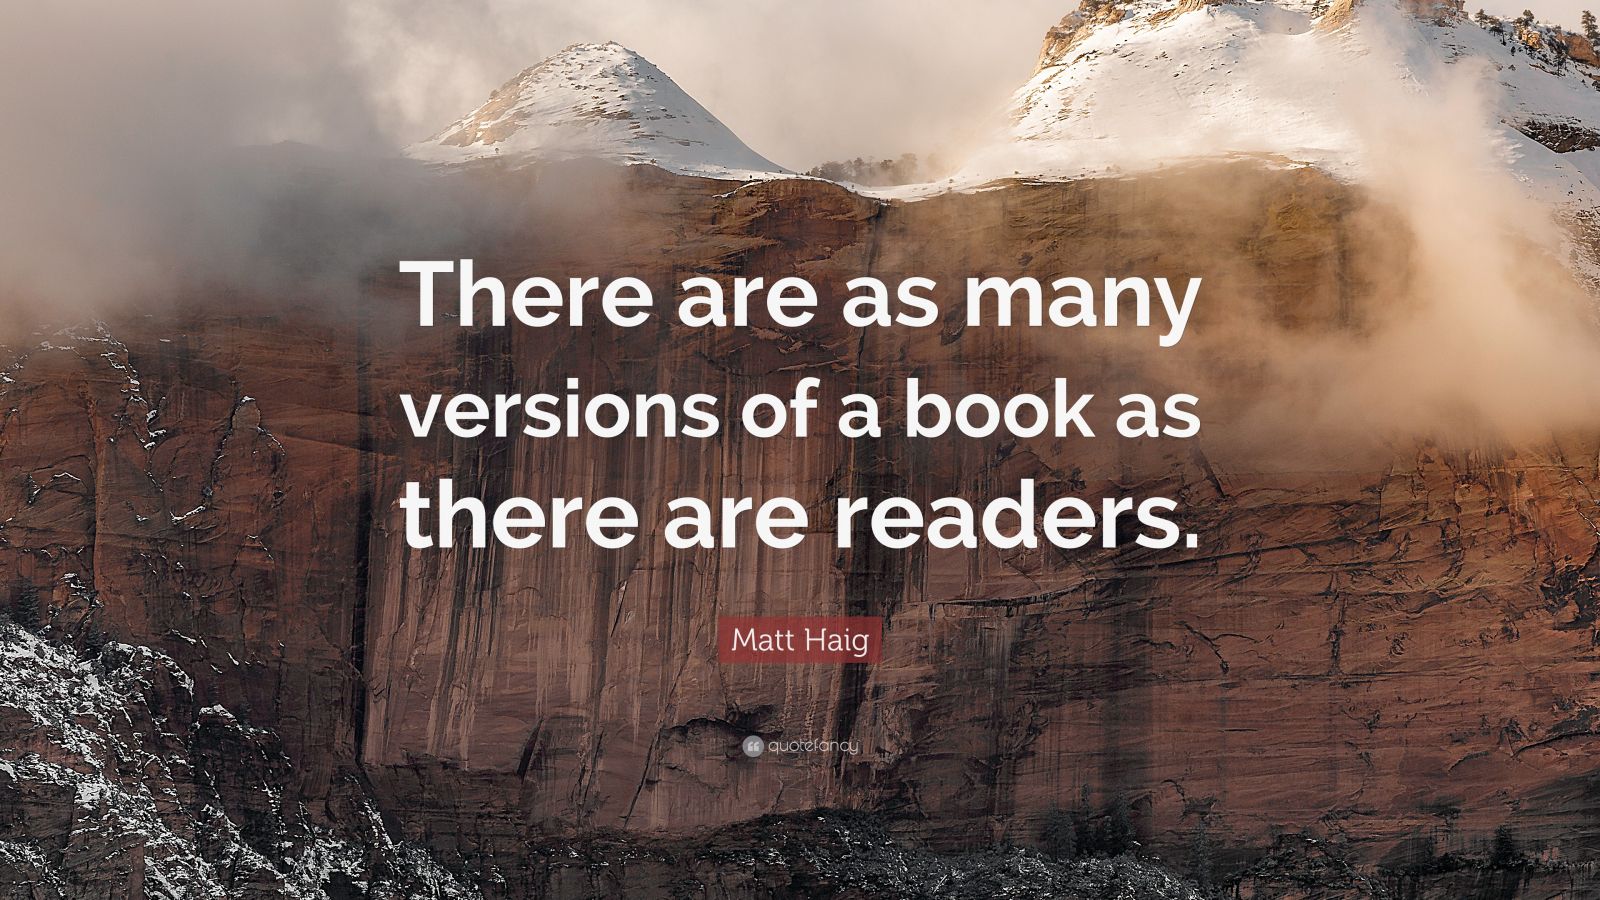 Matt Haig Quote: “There are as many versions of a book as there are ...